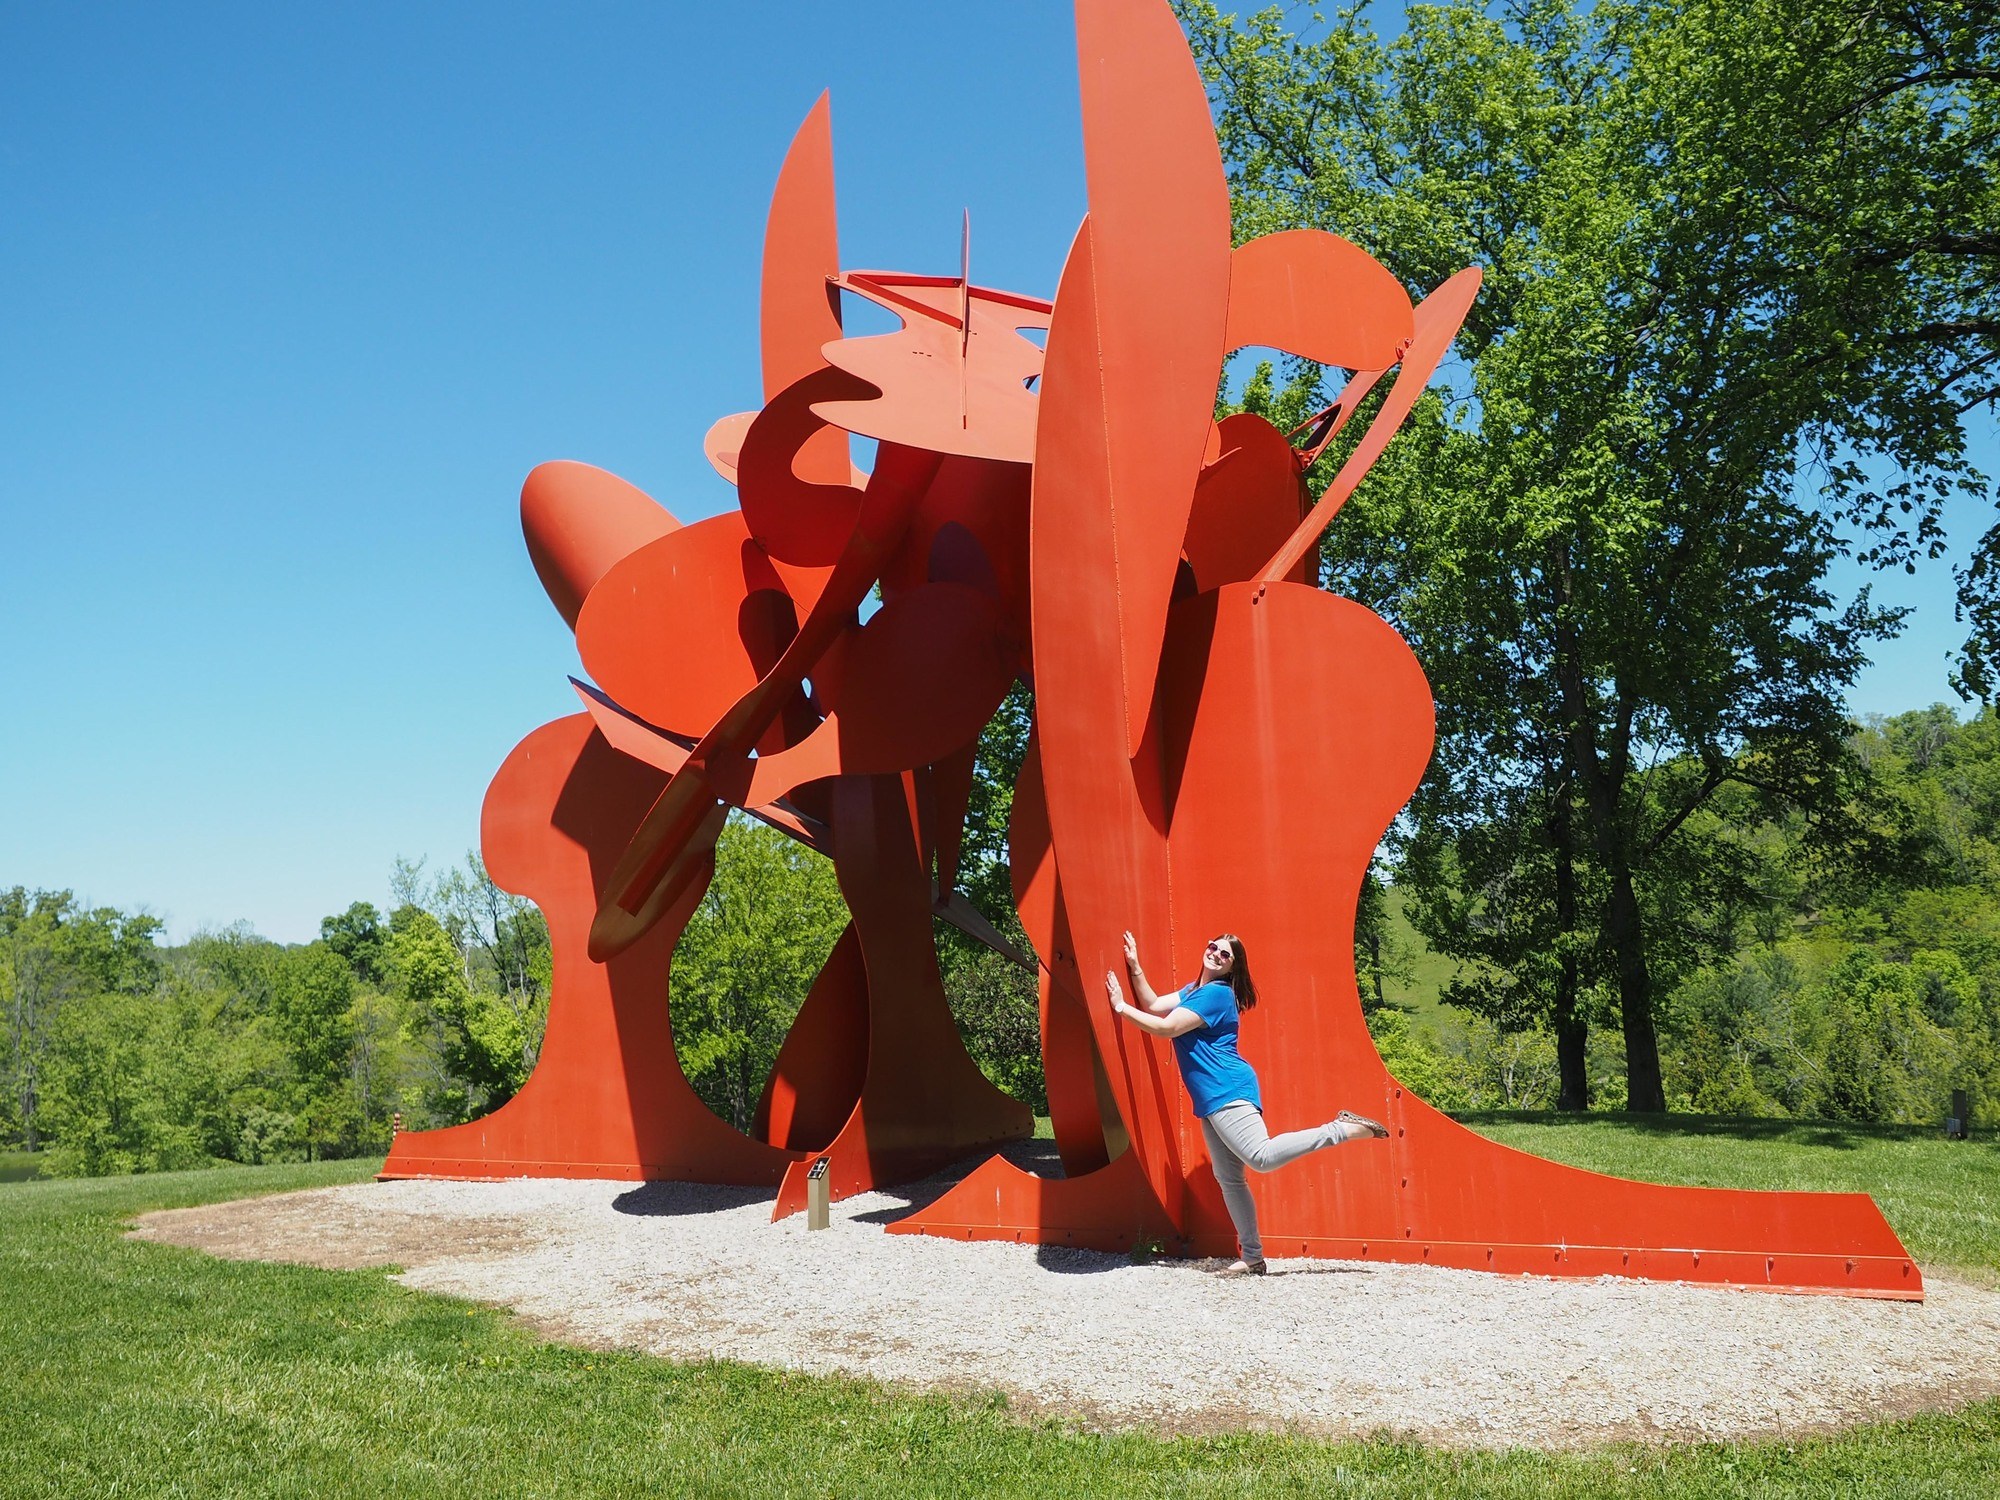 Pyramid Hill Sculpture Park in Butler County, Ohio